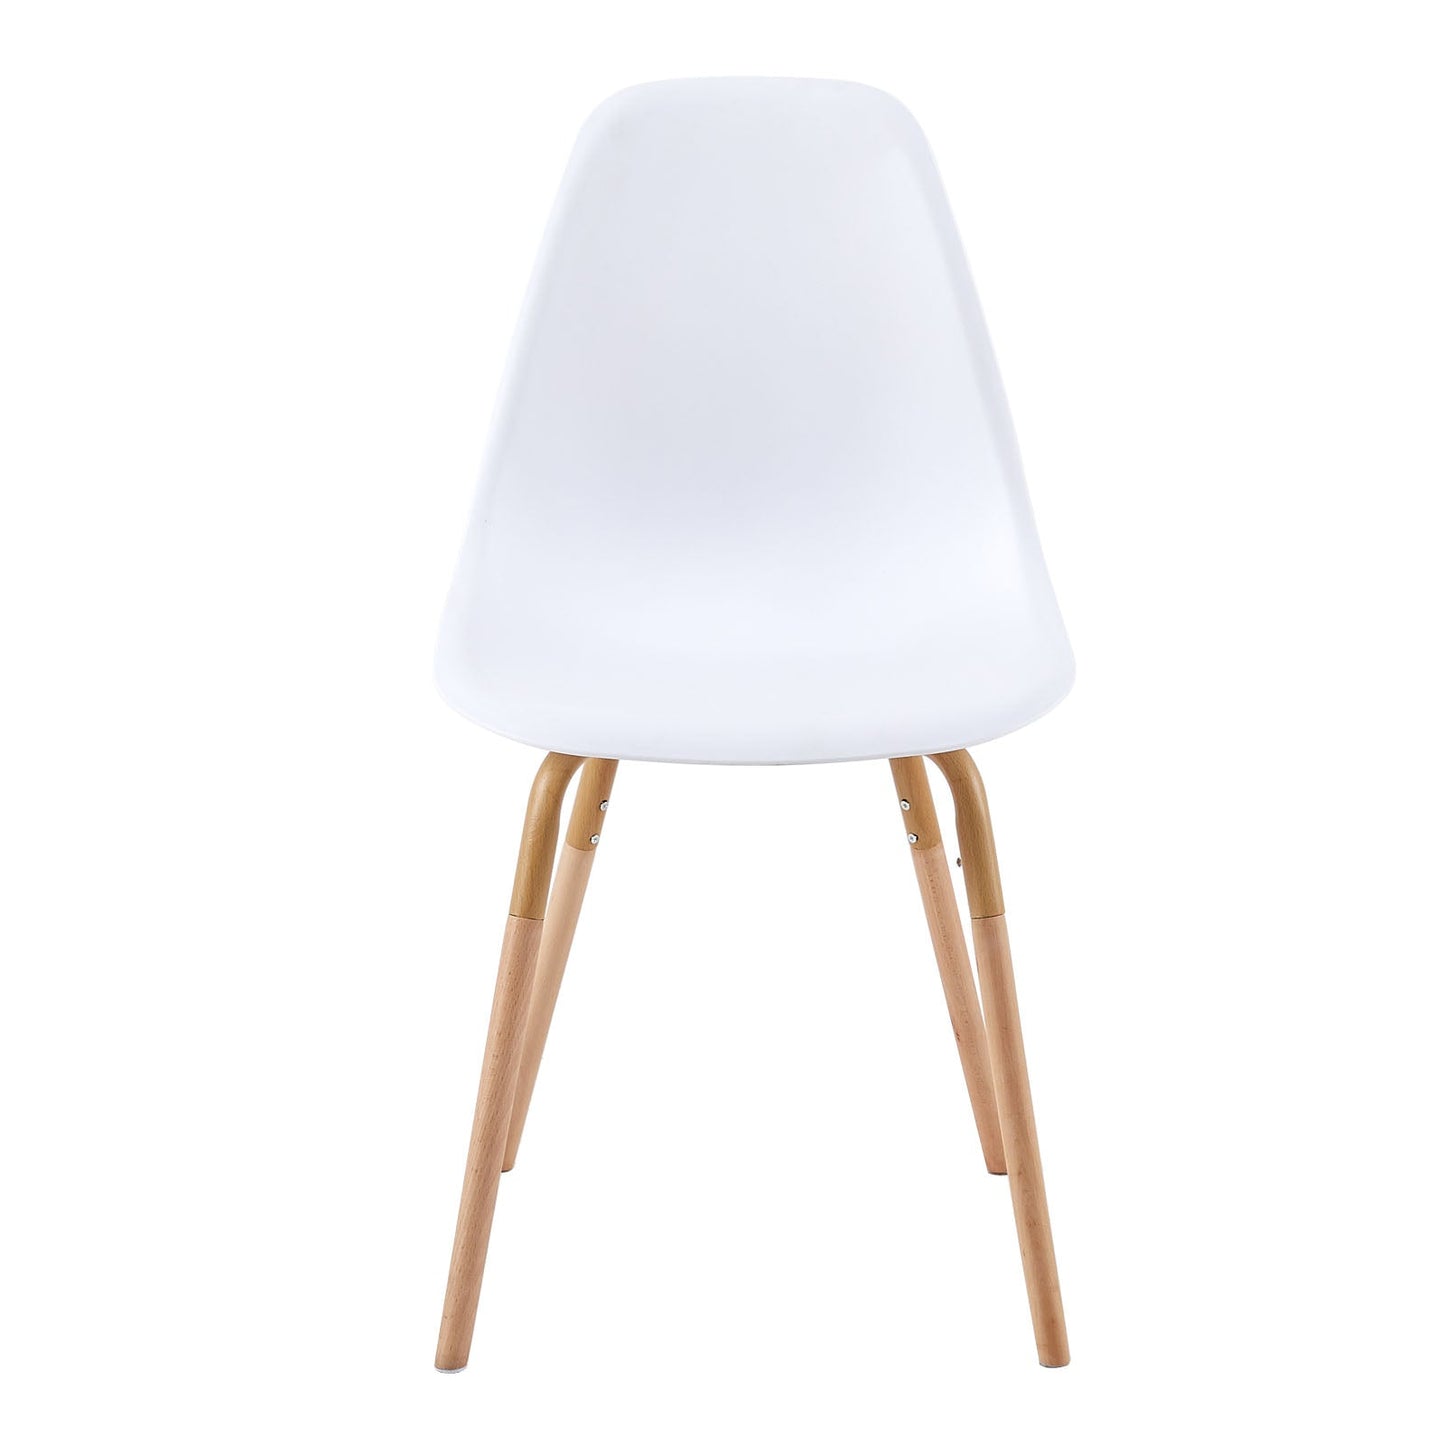 TOON Dining Chairs with Solid Wood Legs - White